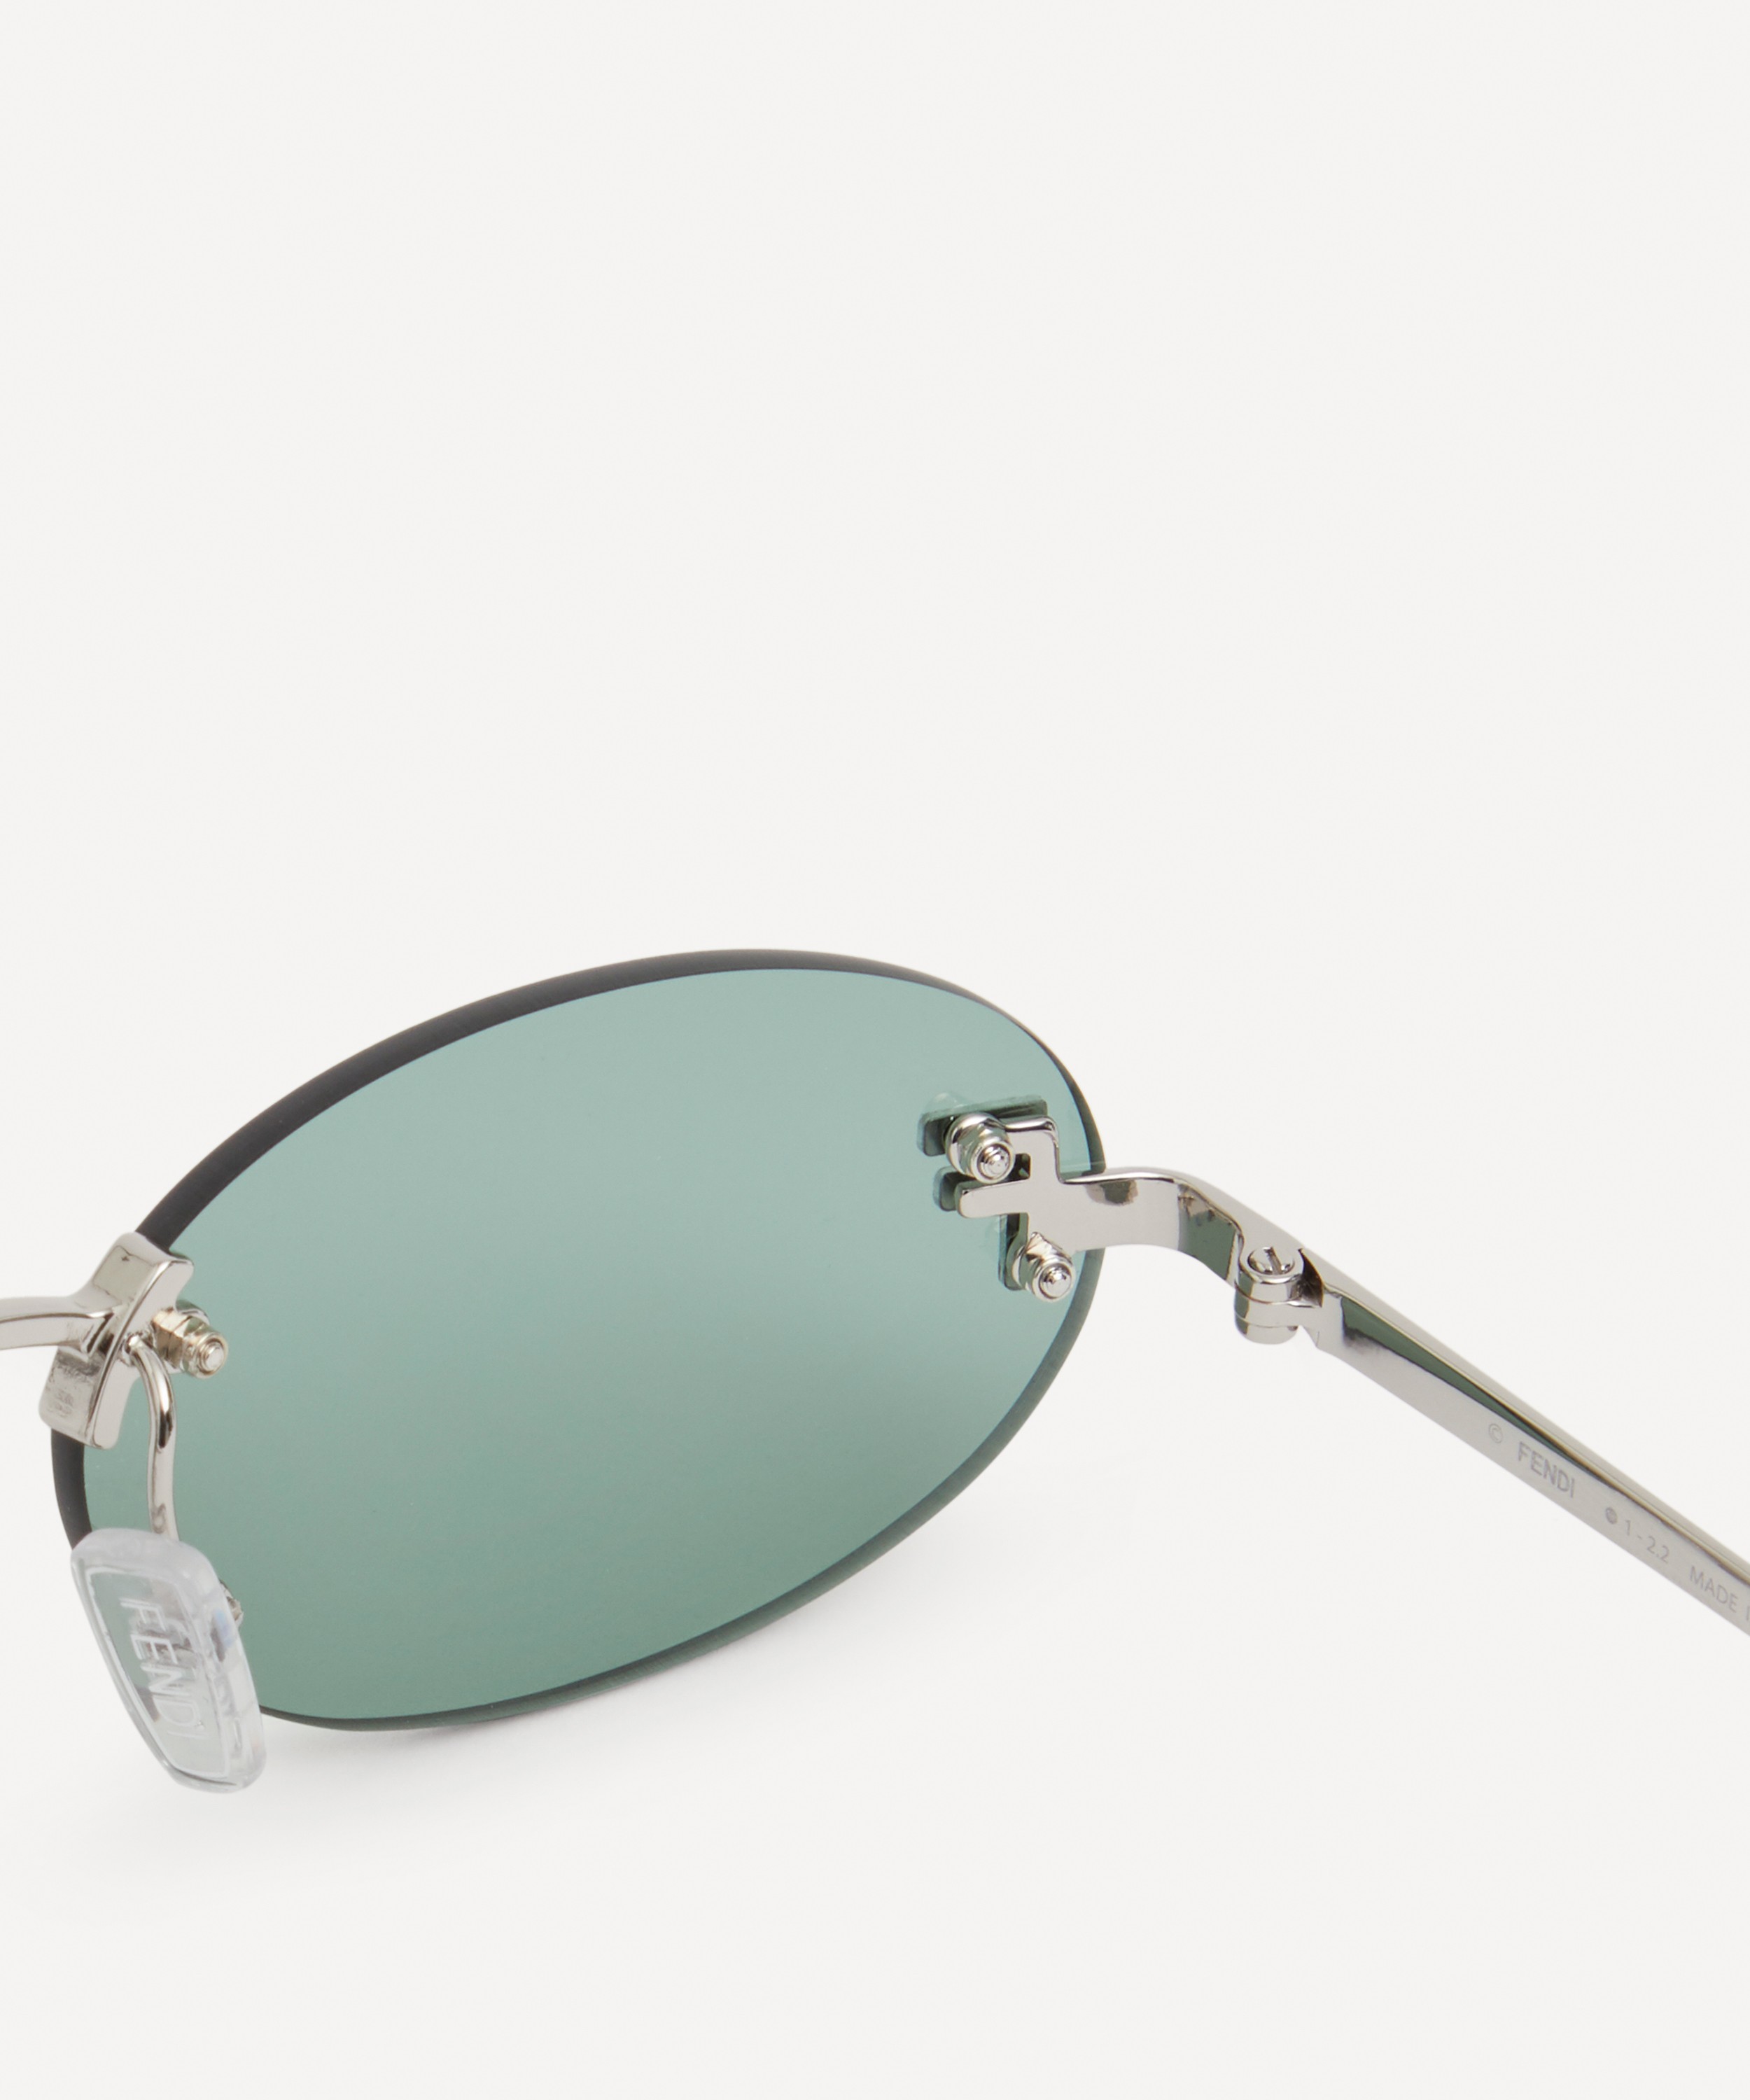 Fendi First Oval Sunglasses In green W/ Crystals